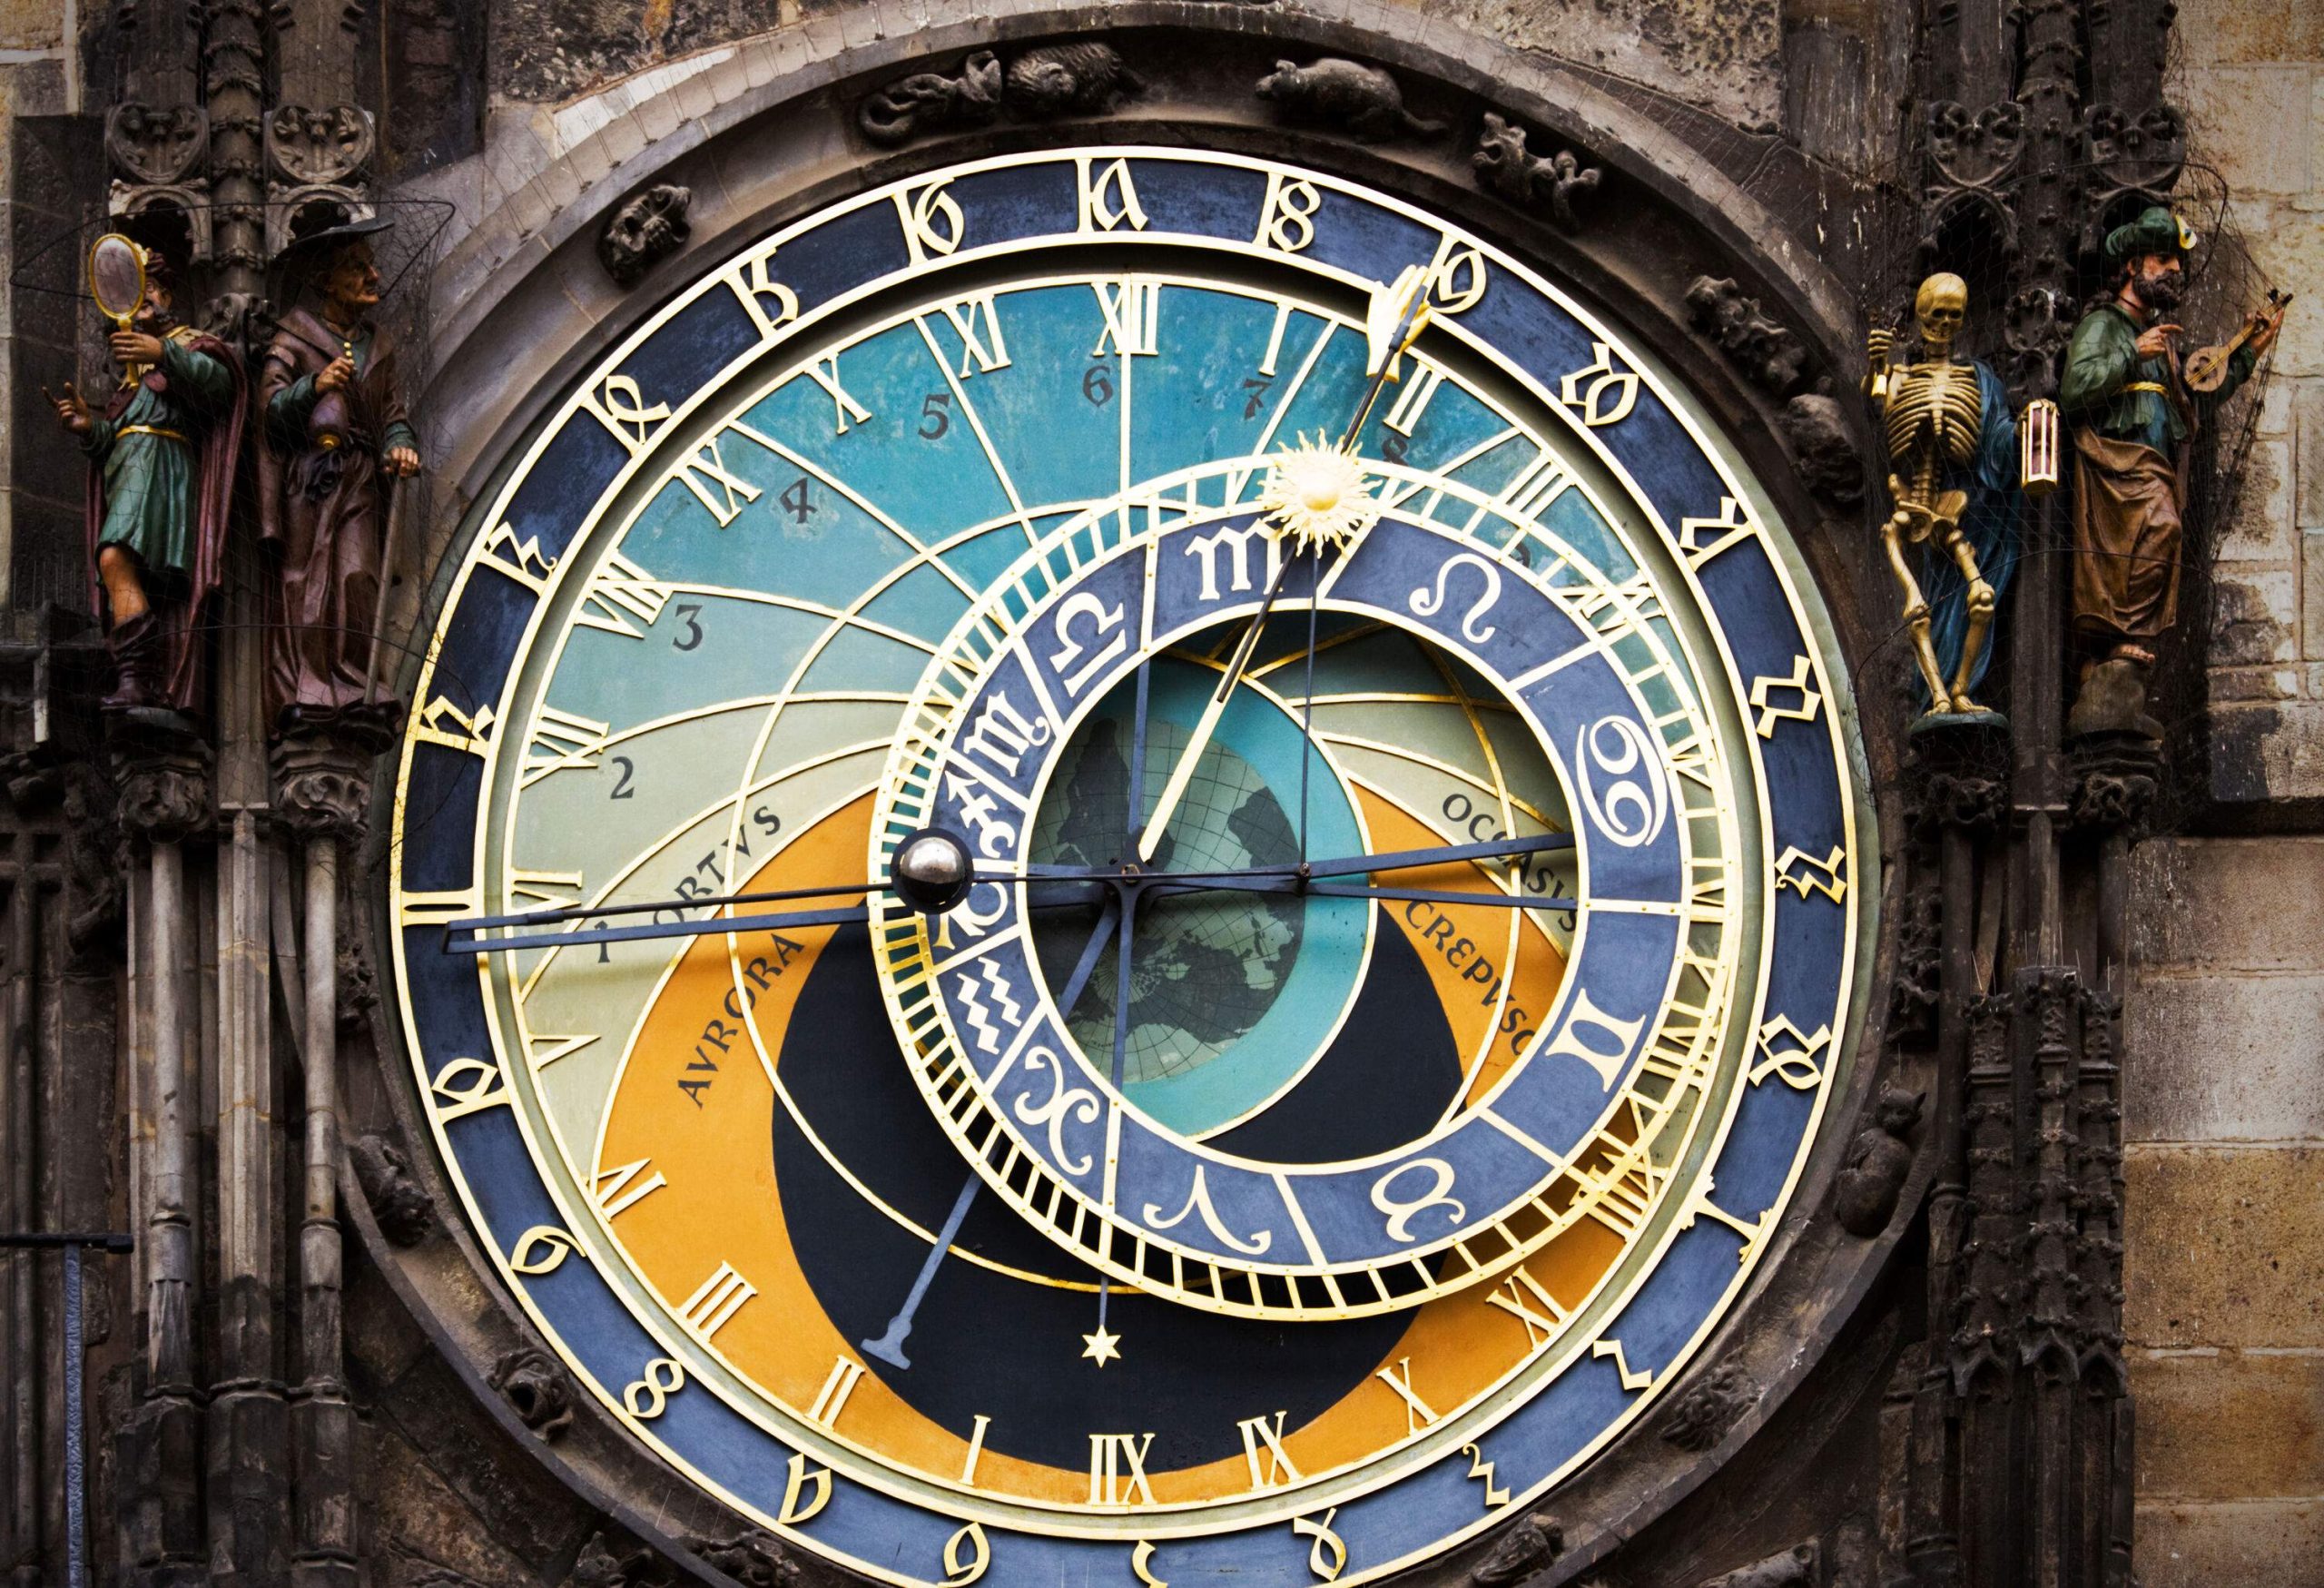 The Prague astronomical clock, adorned with Roman numerals and astronomical symbols, is flanked by intricate statues, including a personification of death and figures representing the twelve apostles.